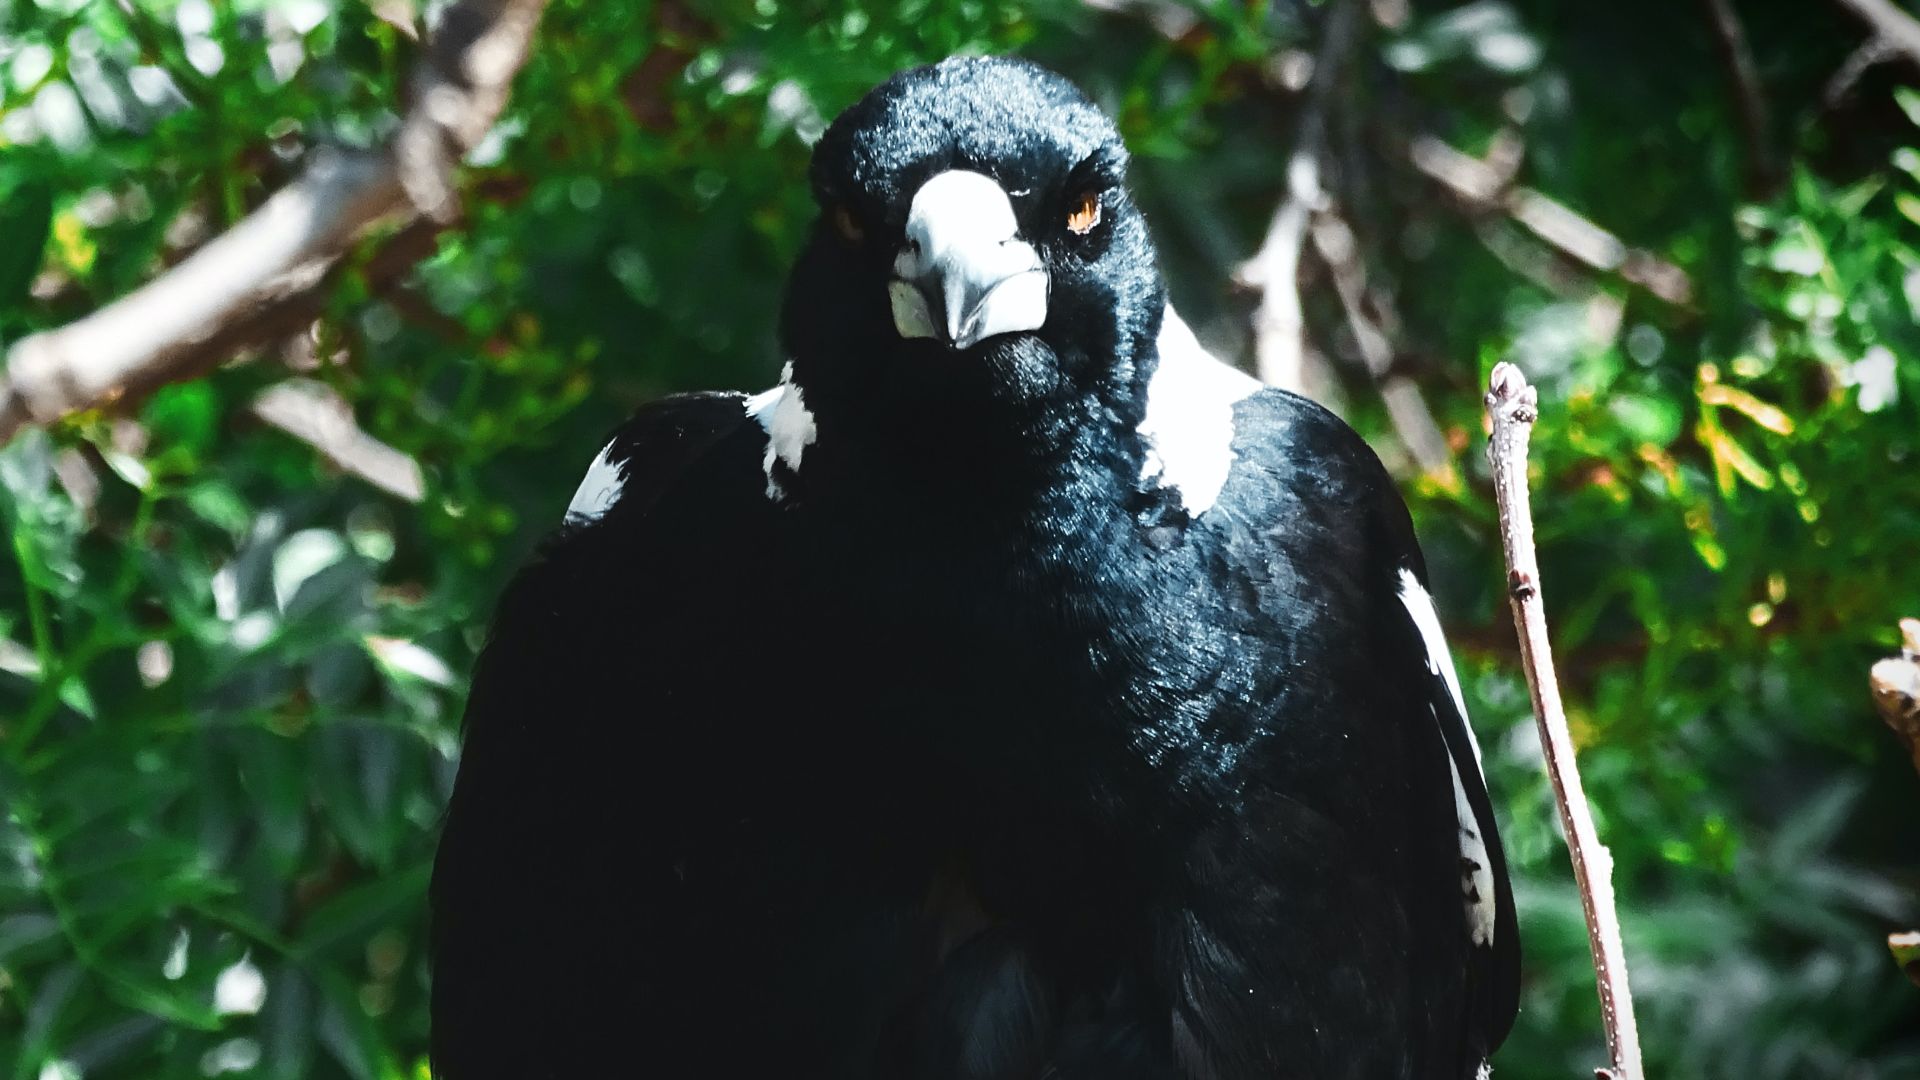 Strategic avoidance trumps ‘fake eyes’: how to safeguard yourself from swooping magpies